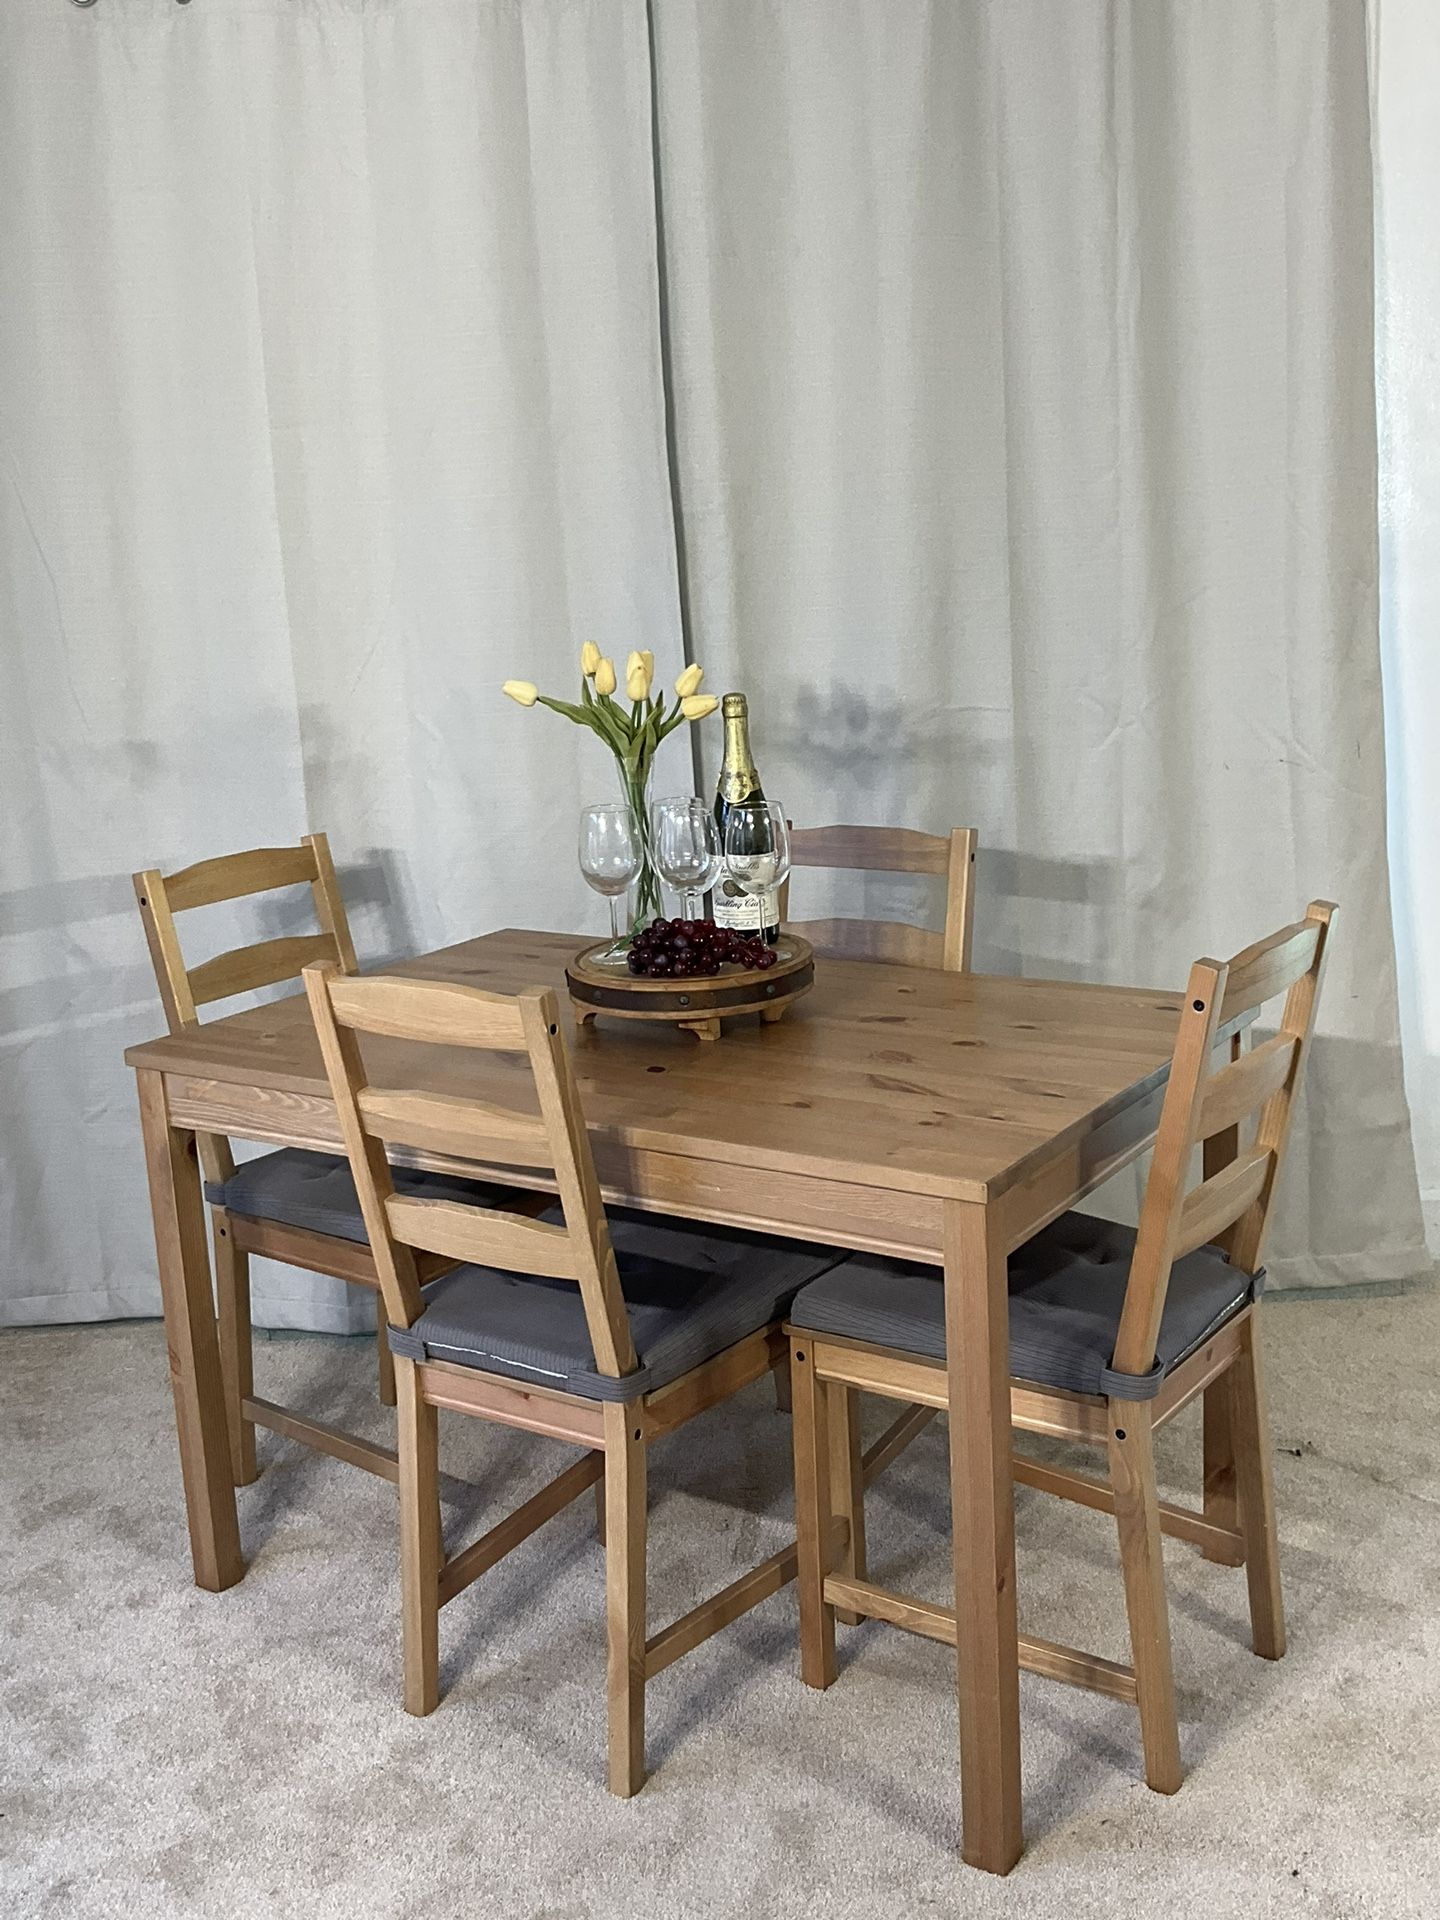 Compact Kitchen Dining Table & 4 Chairs LIKE NEW! 